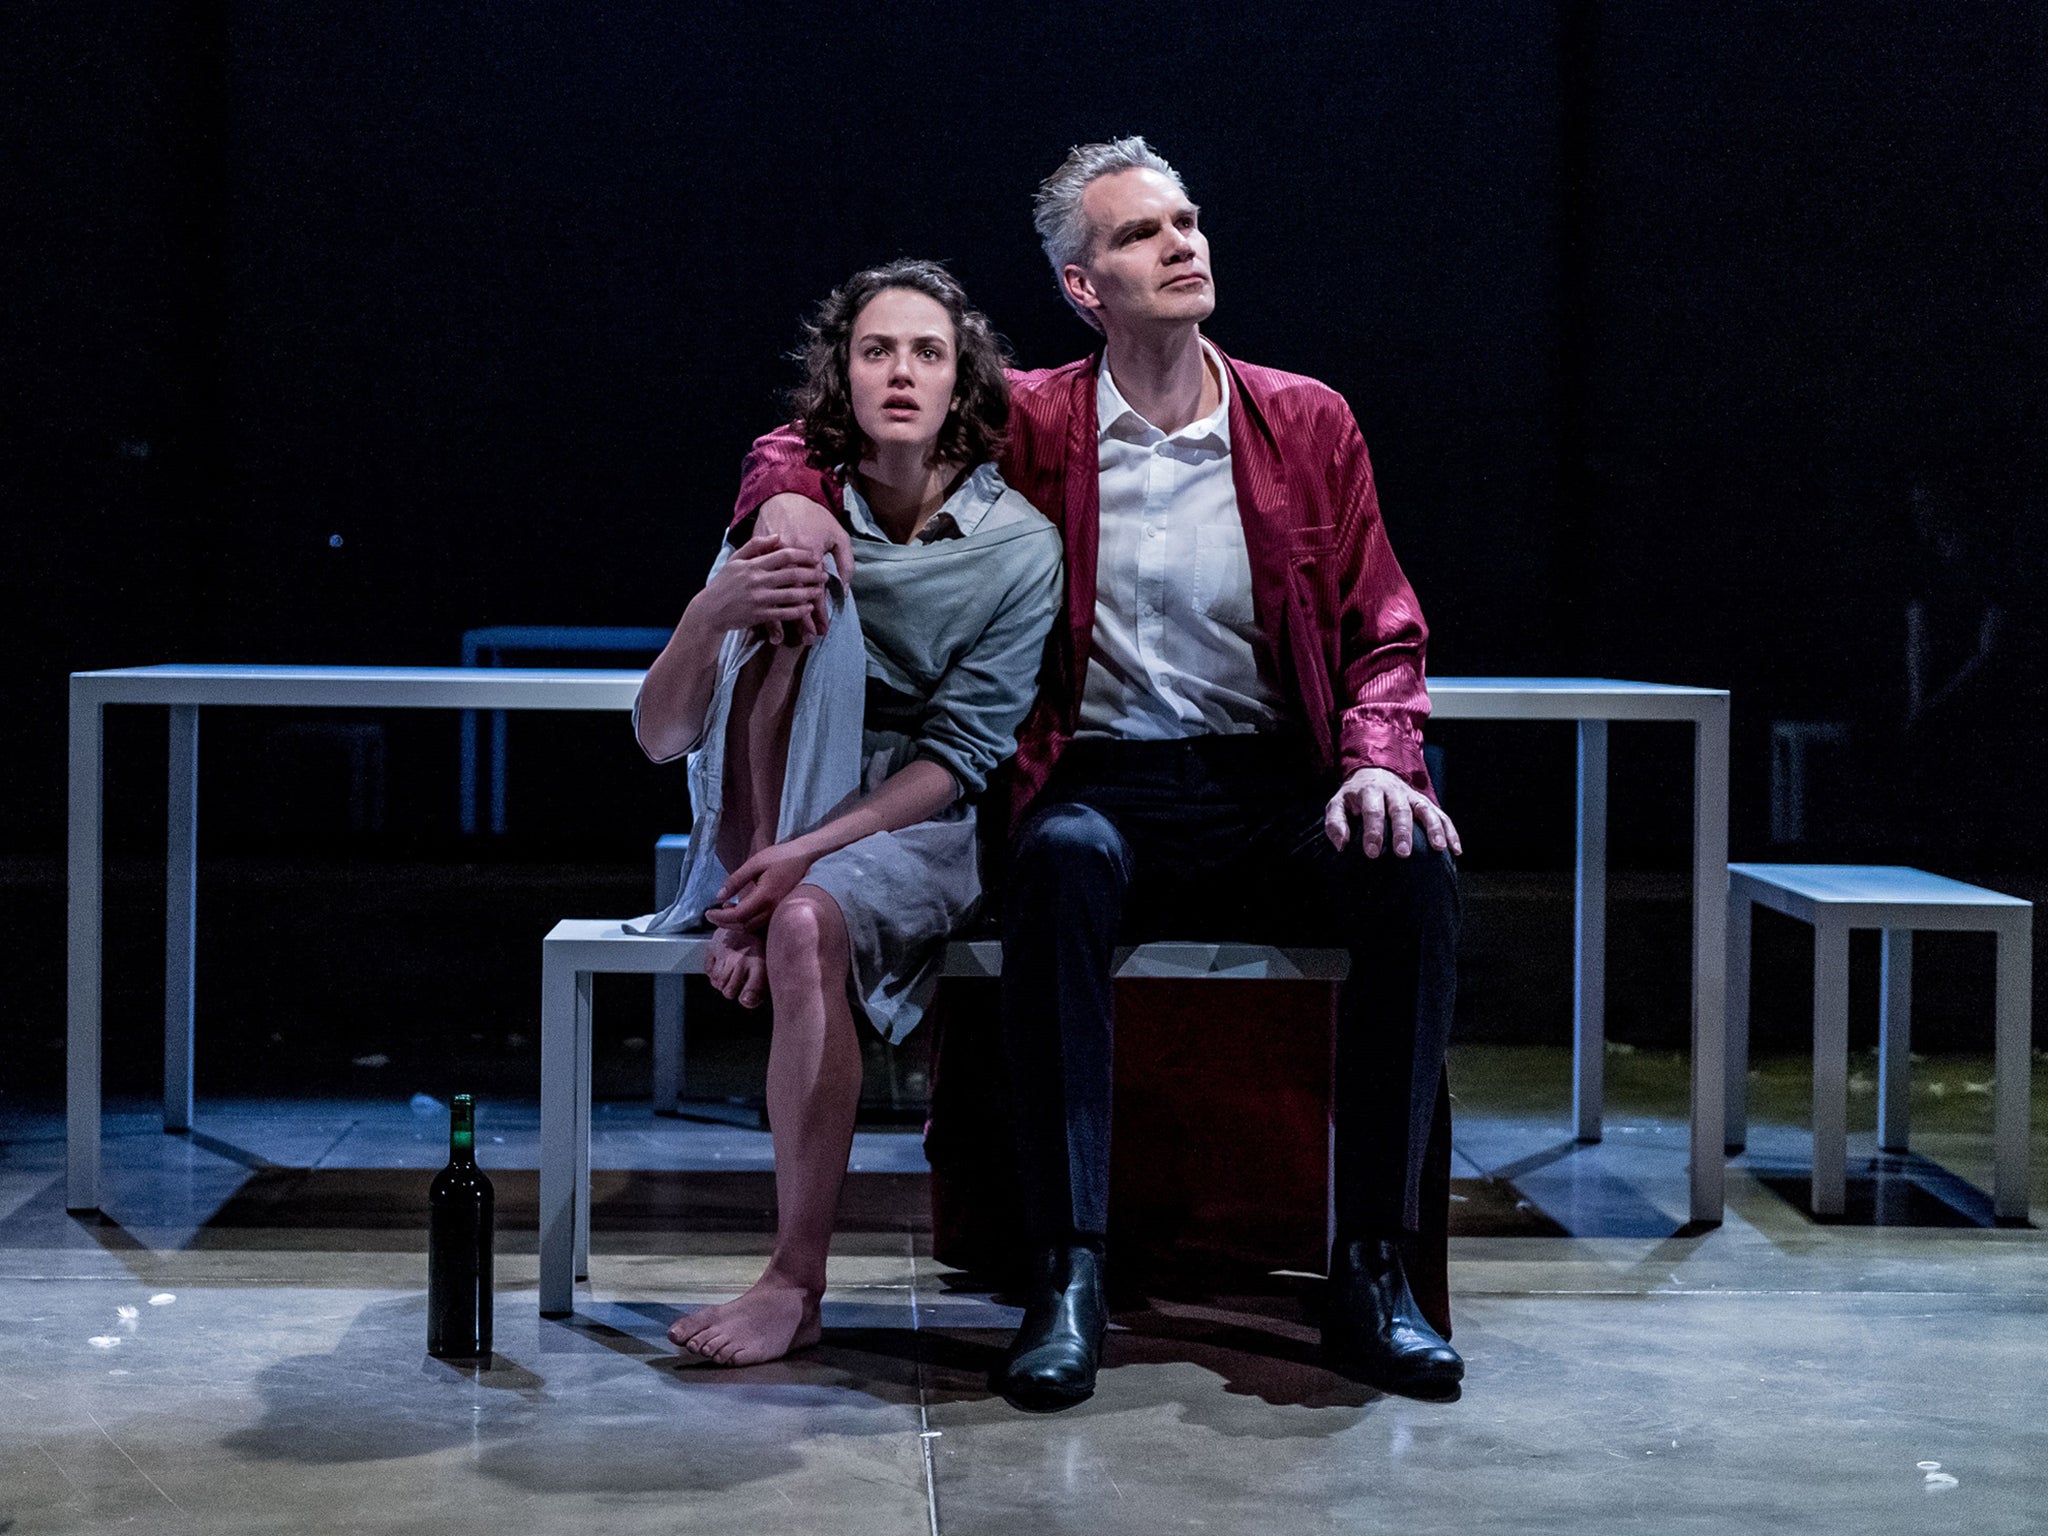 Jessica Brown Findlay and Angus Wright in Oresteia at the Almeida Theatre, London